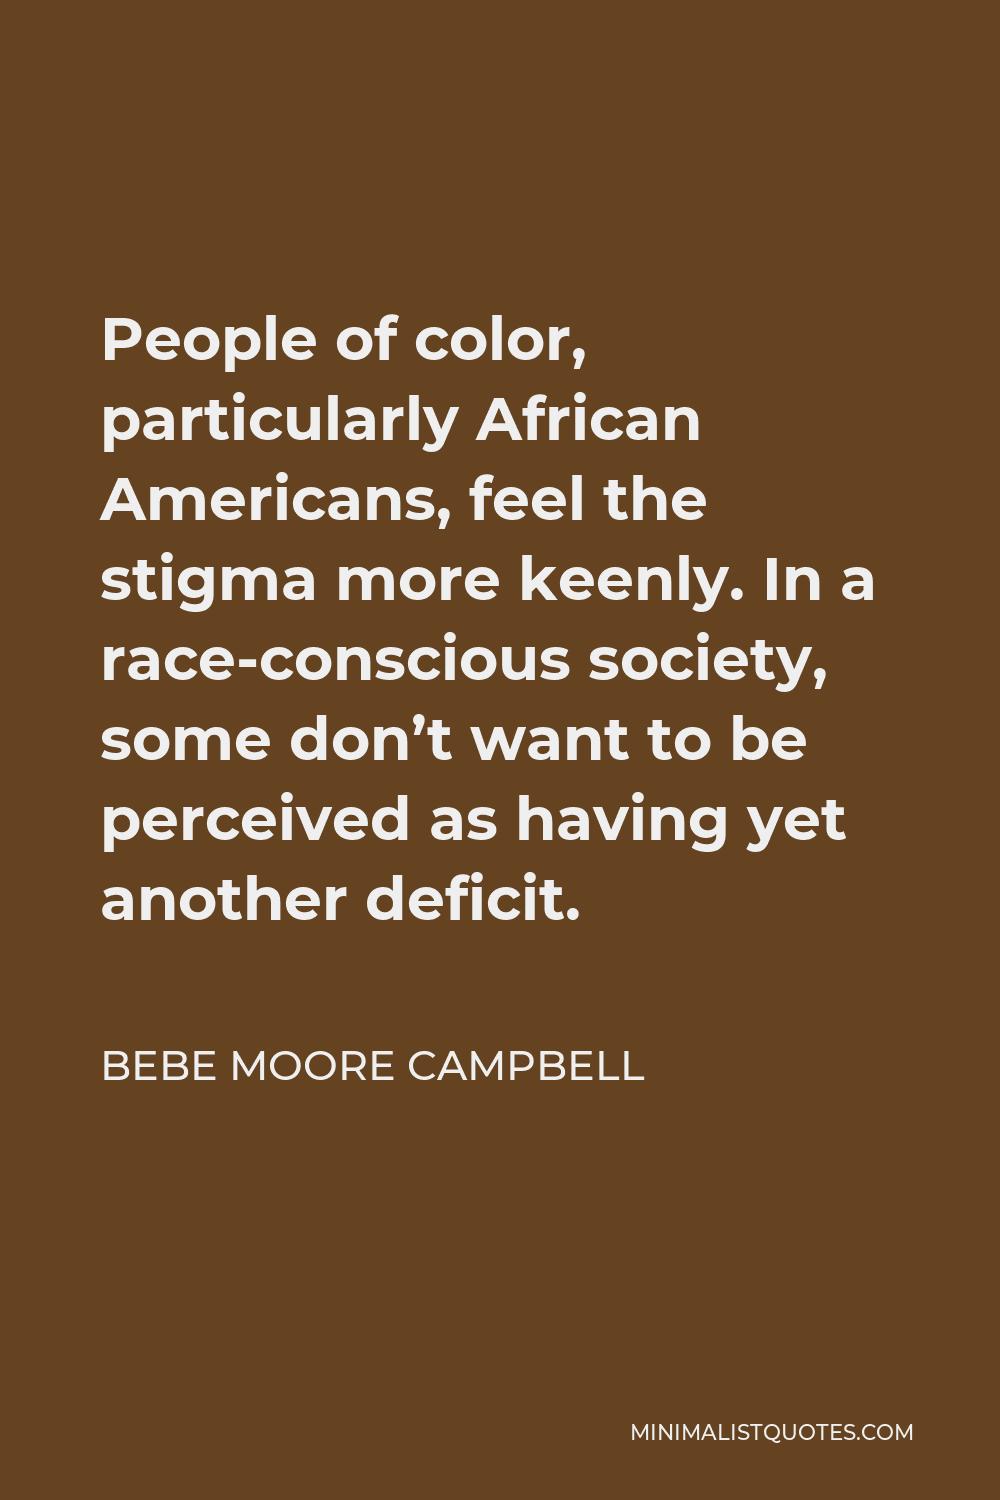 Bebe Moore Campbell Quote - People of color, particularly African Americans, feel the stigma more keenly. In a race-conscious society, some don’t want to be perceived as having yet another deficit.